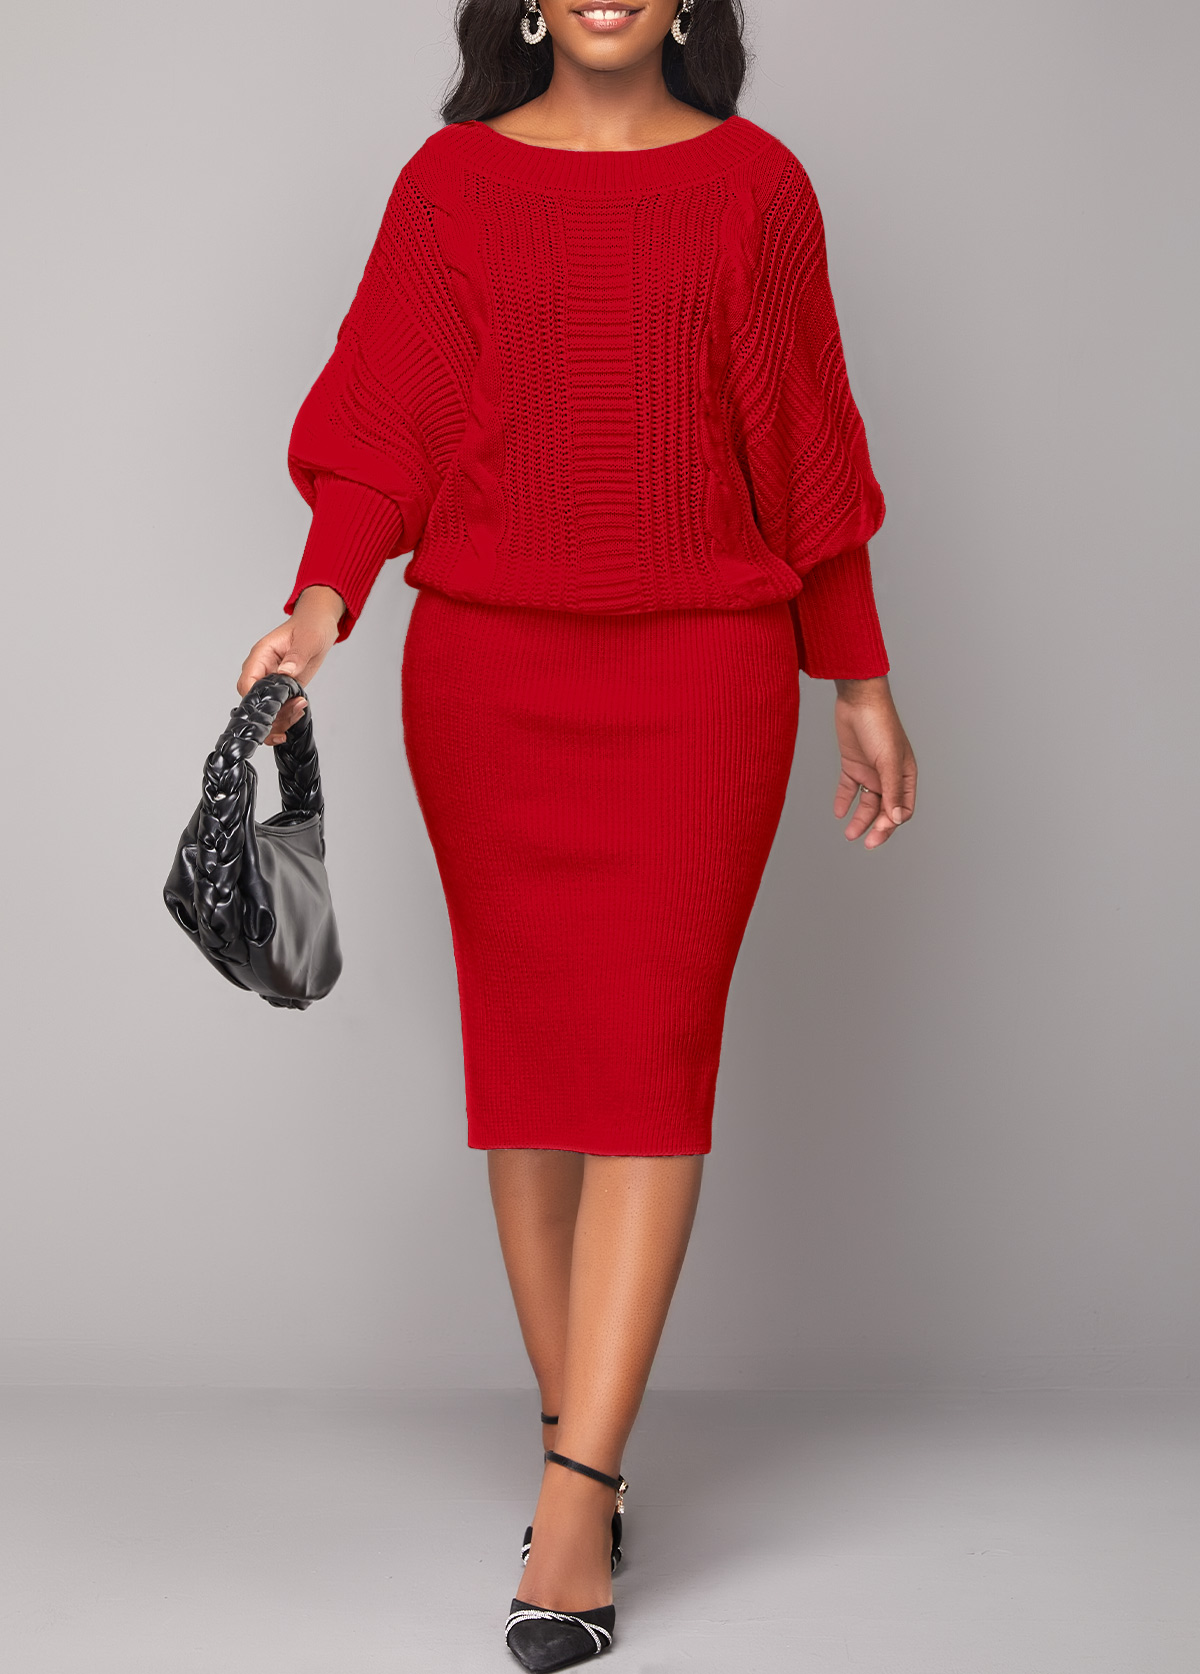 Red Long Sleeve Boat Neck Bodycon Dress